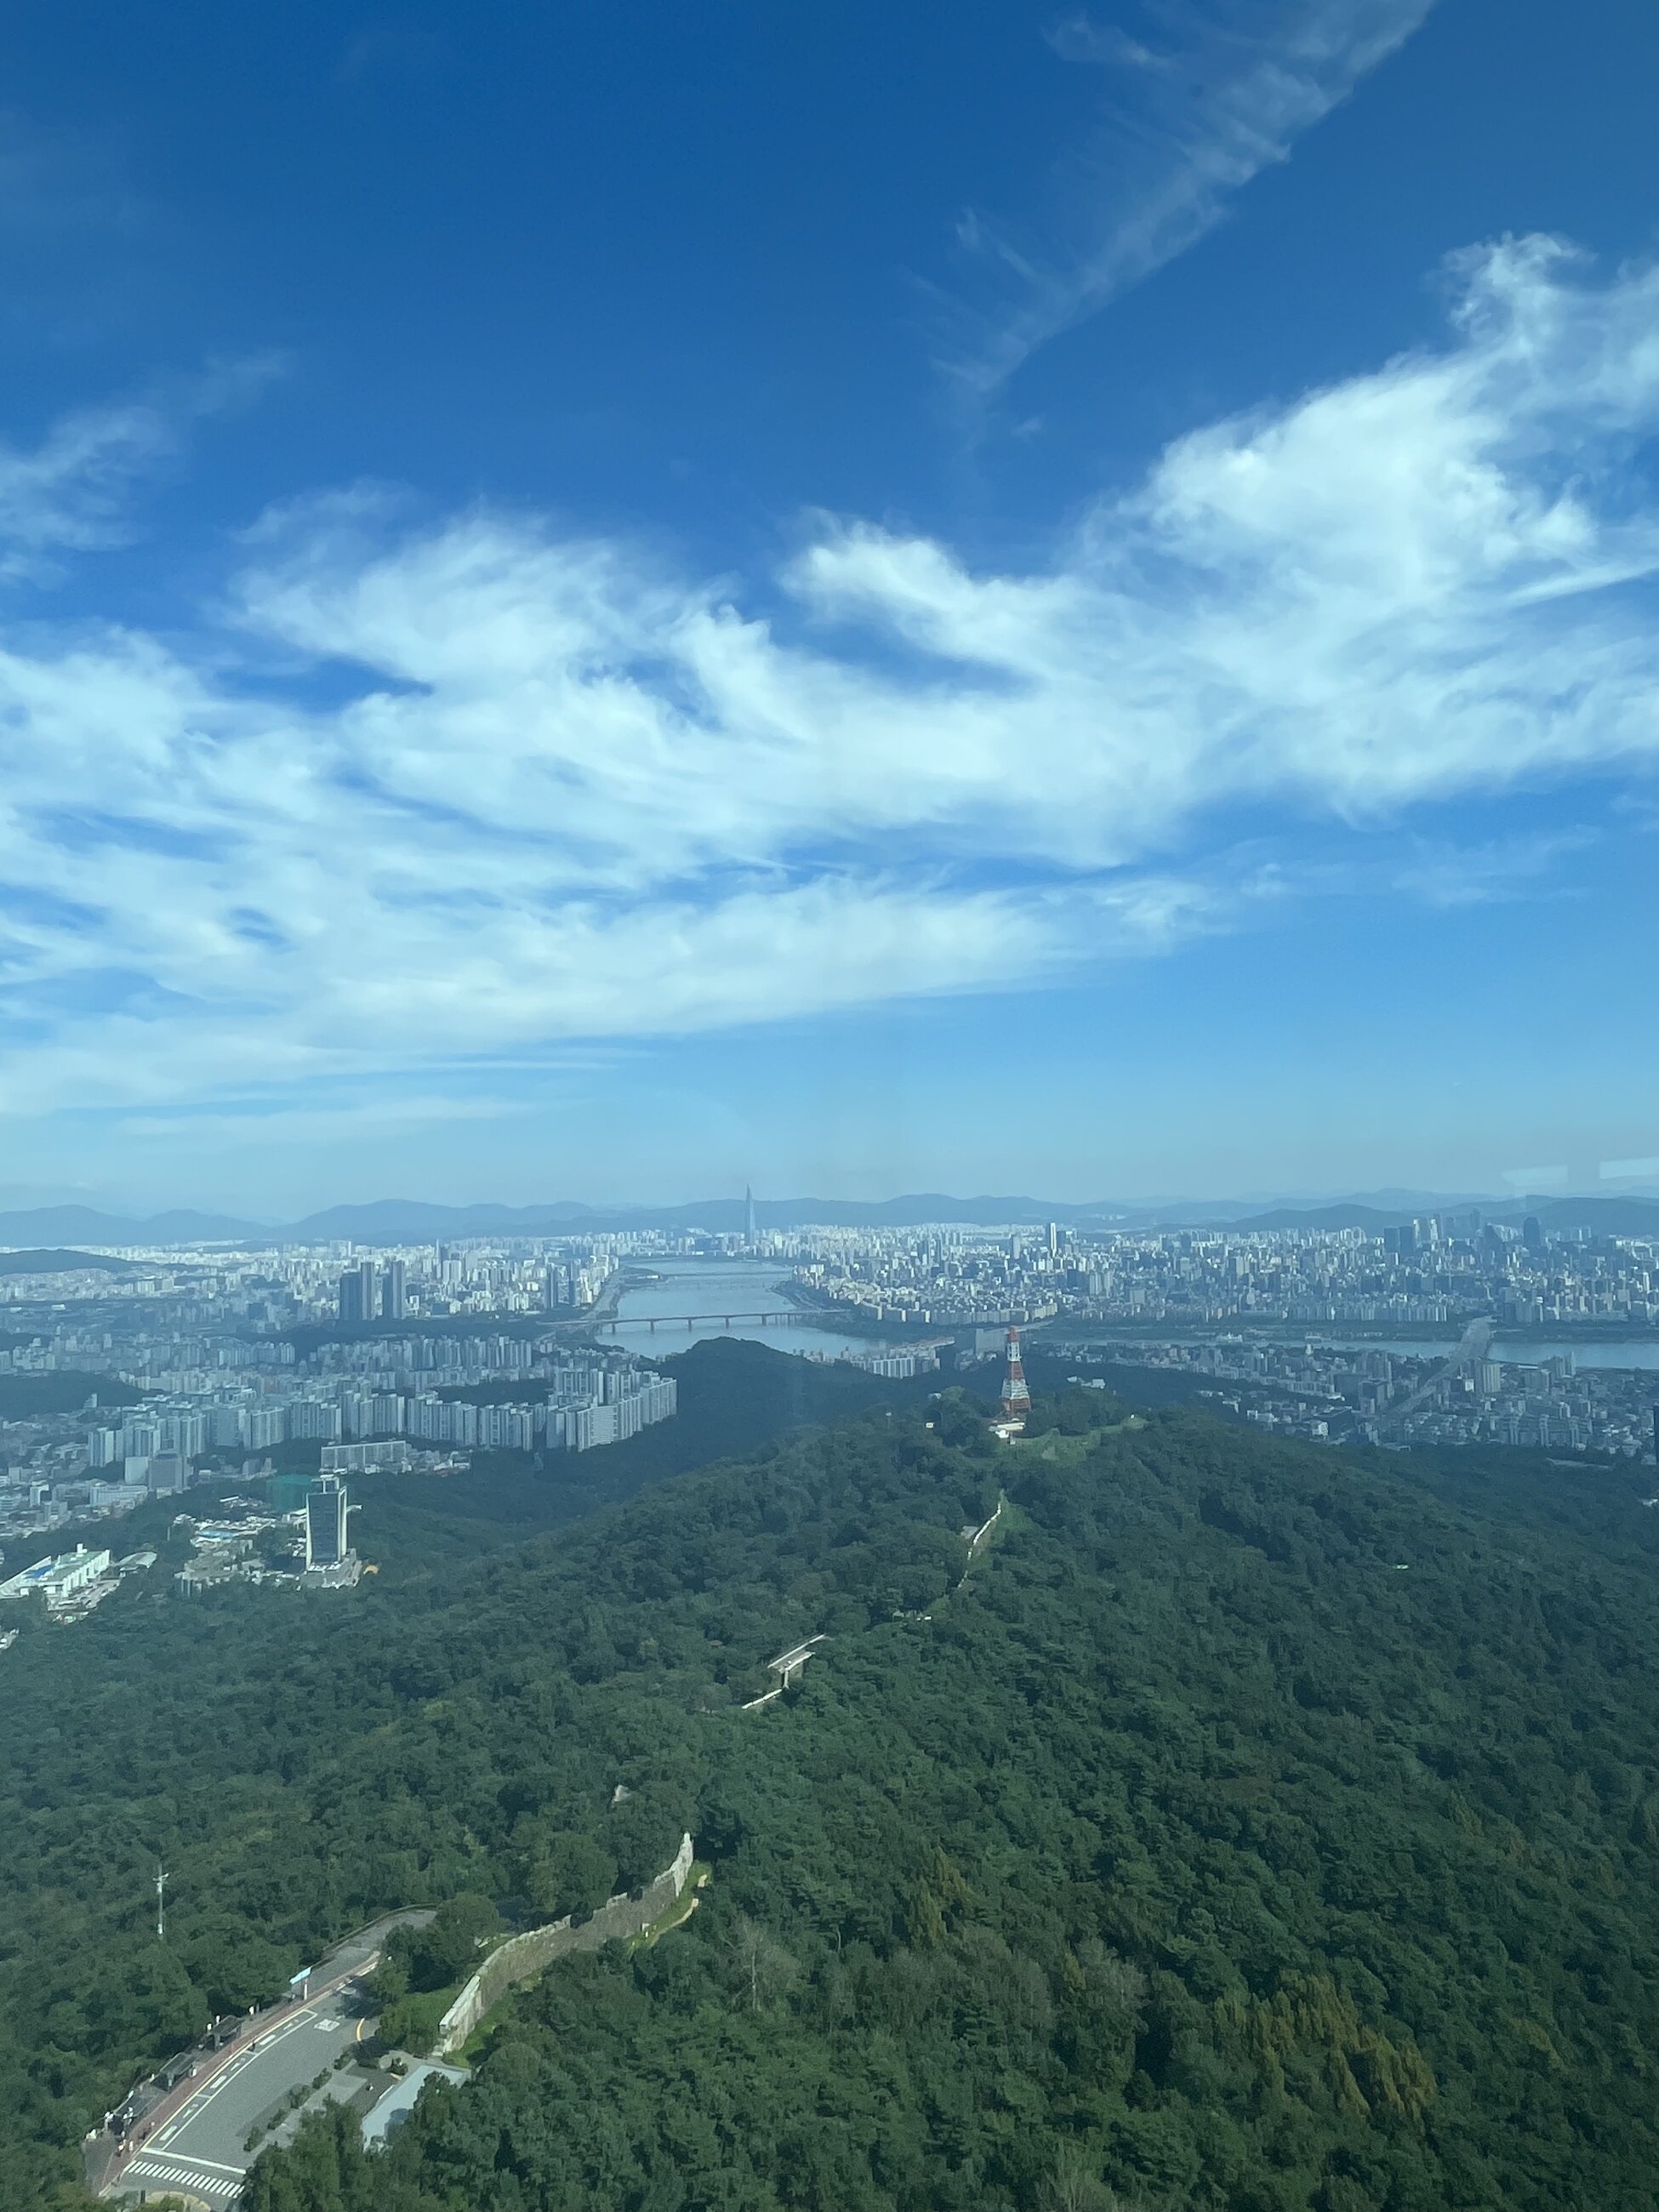 This is a beautiful view of Seoul from Namsan Tower!